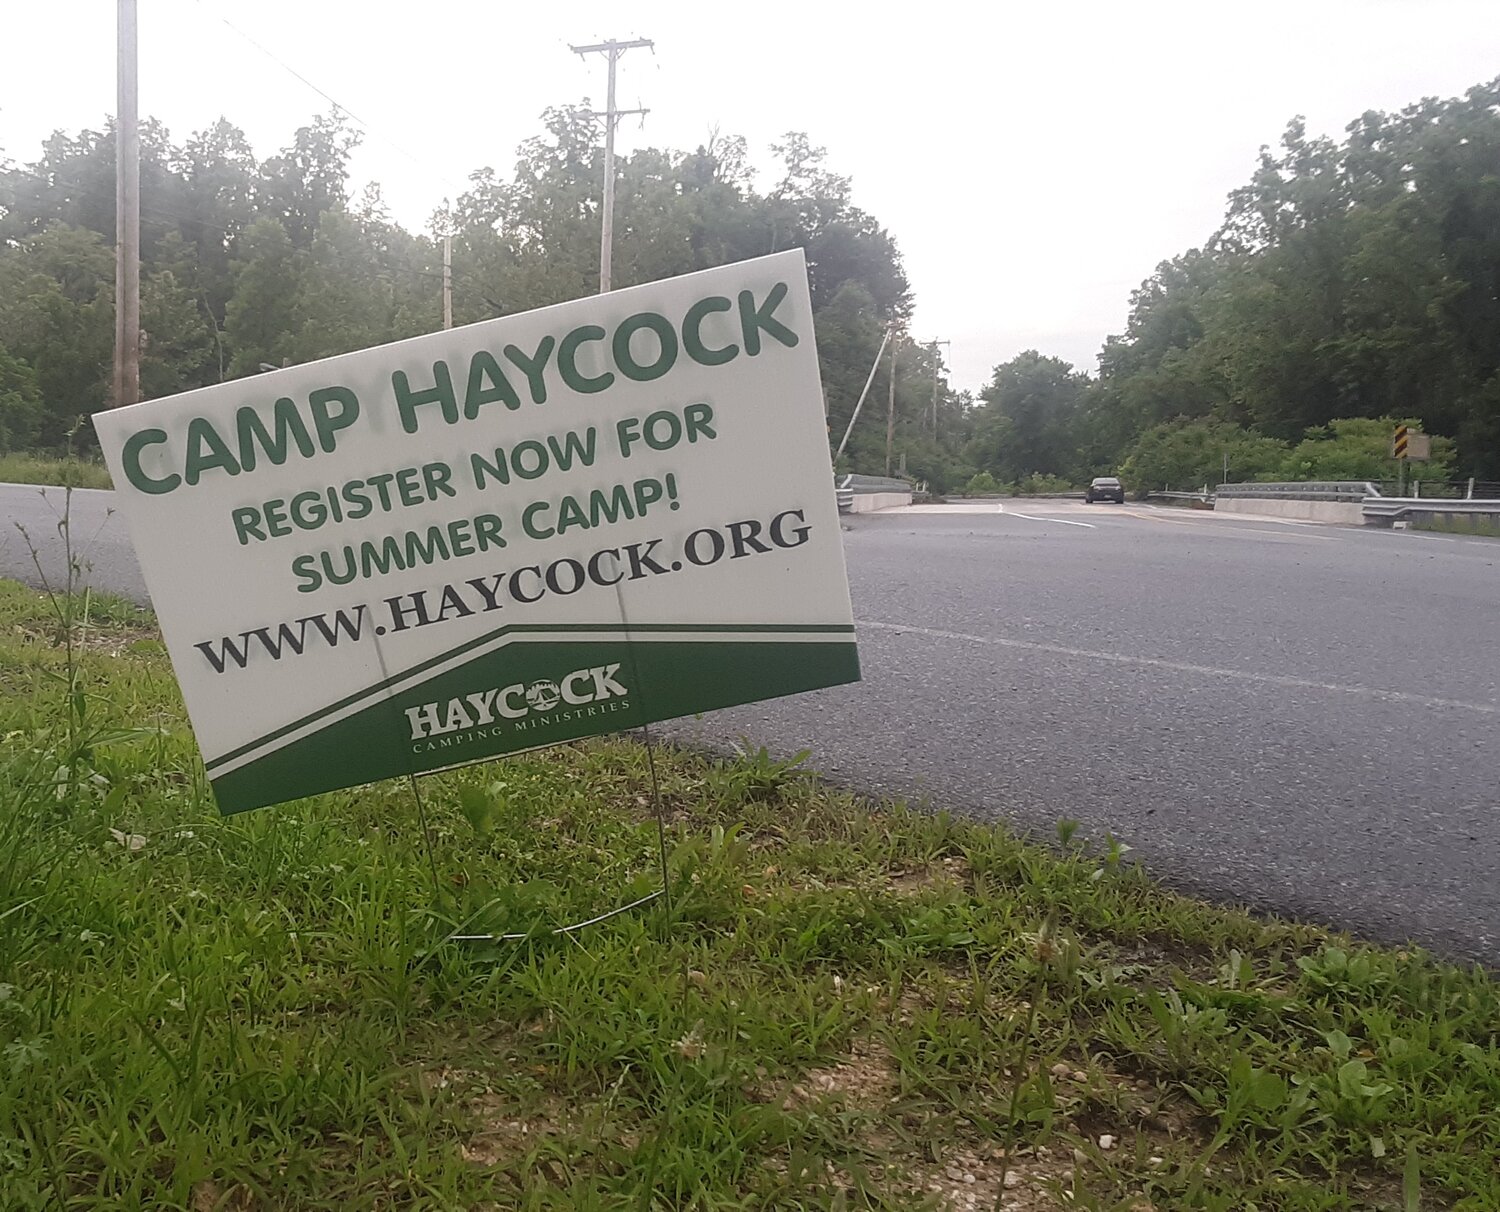 Haycock Camping Ministries advertises in Durham Township. Under the conditional use decision, it will be limited to 600 occupants at any one time, a decision welcomed by opponents of the expansion.